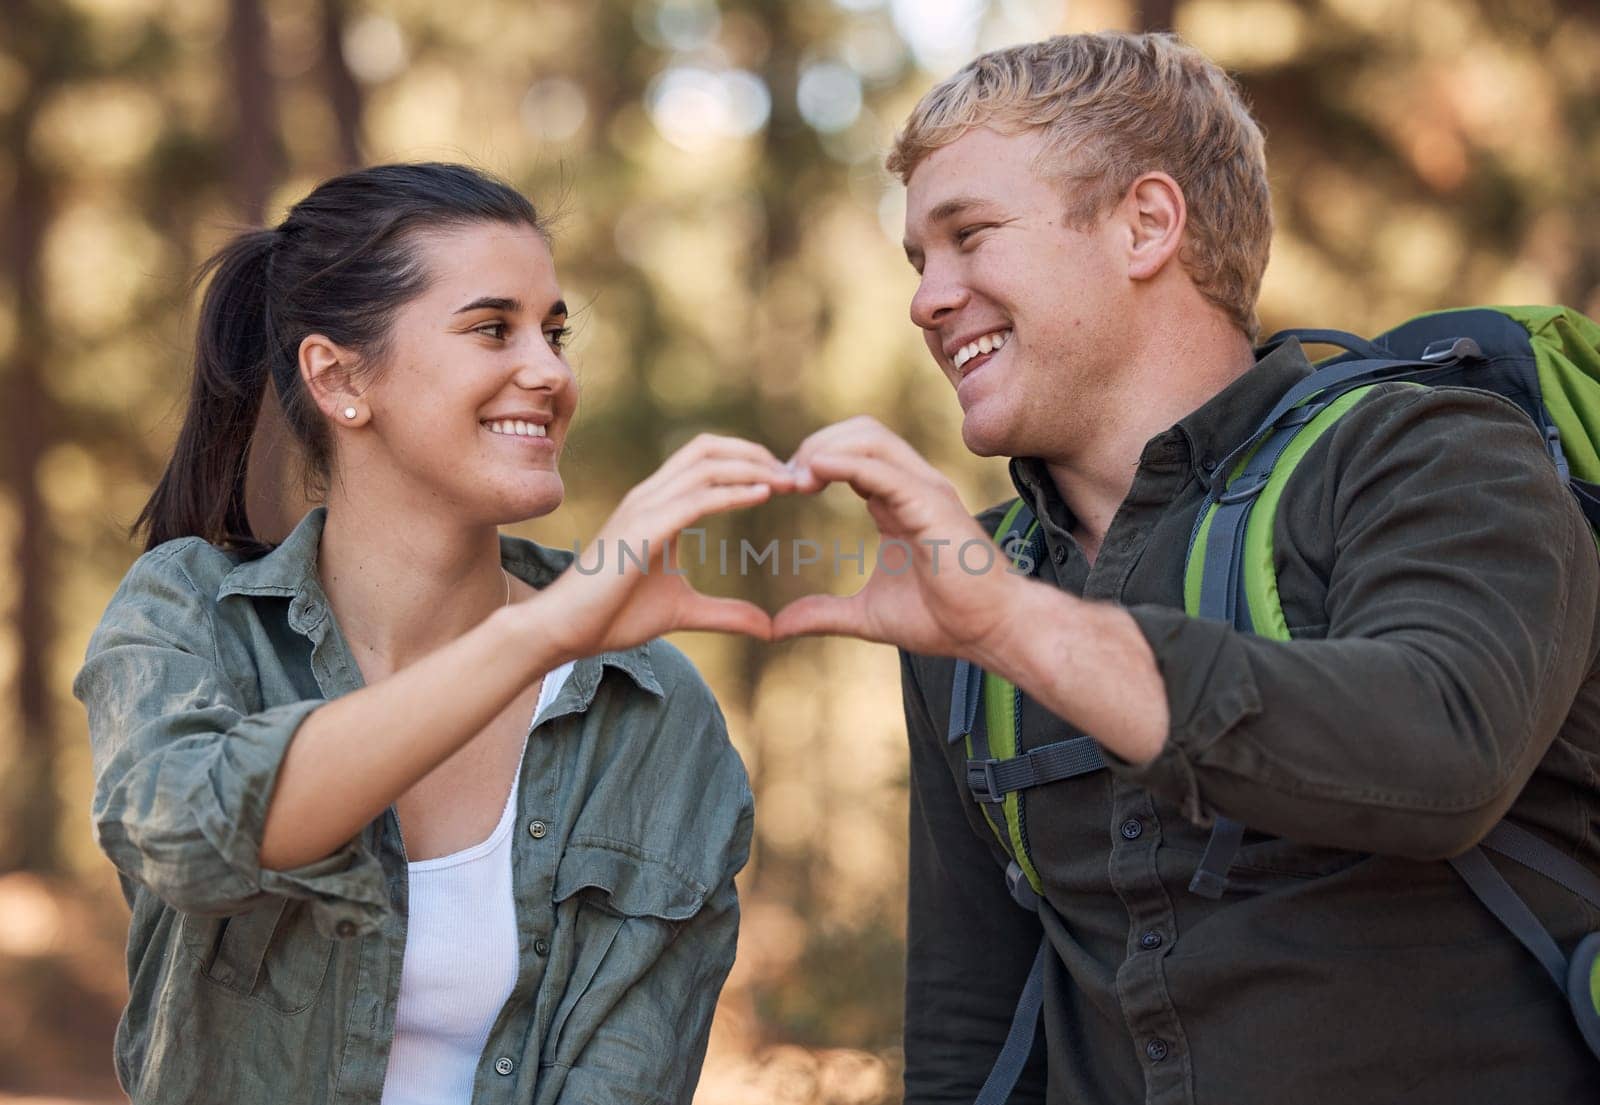 Love, couple and heart hands while hiking in nature for affection or support. Emoji, hand gesture and romance or intimacy shape with happy man and woman on adventure or trekking outdoors in forest